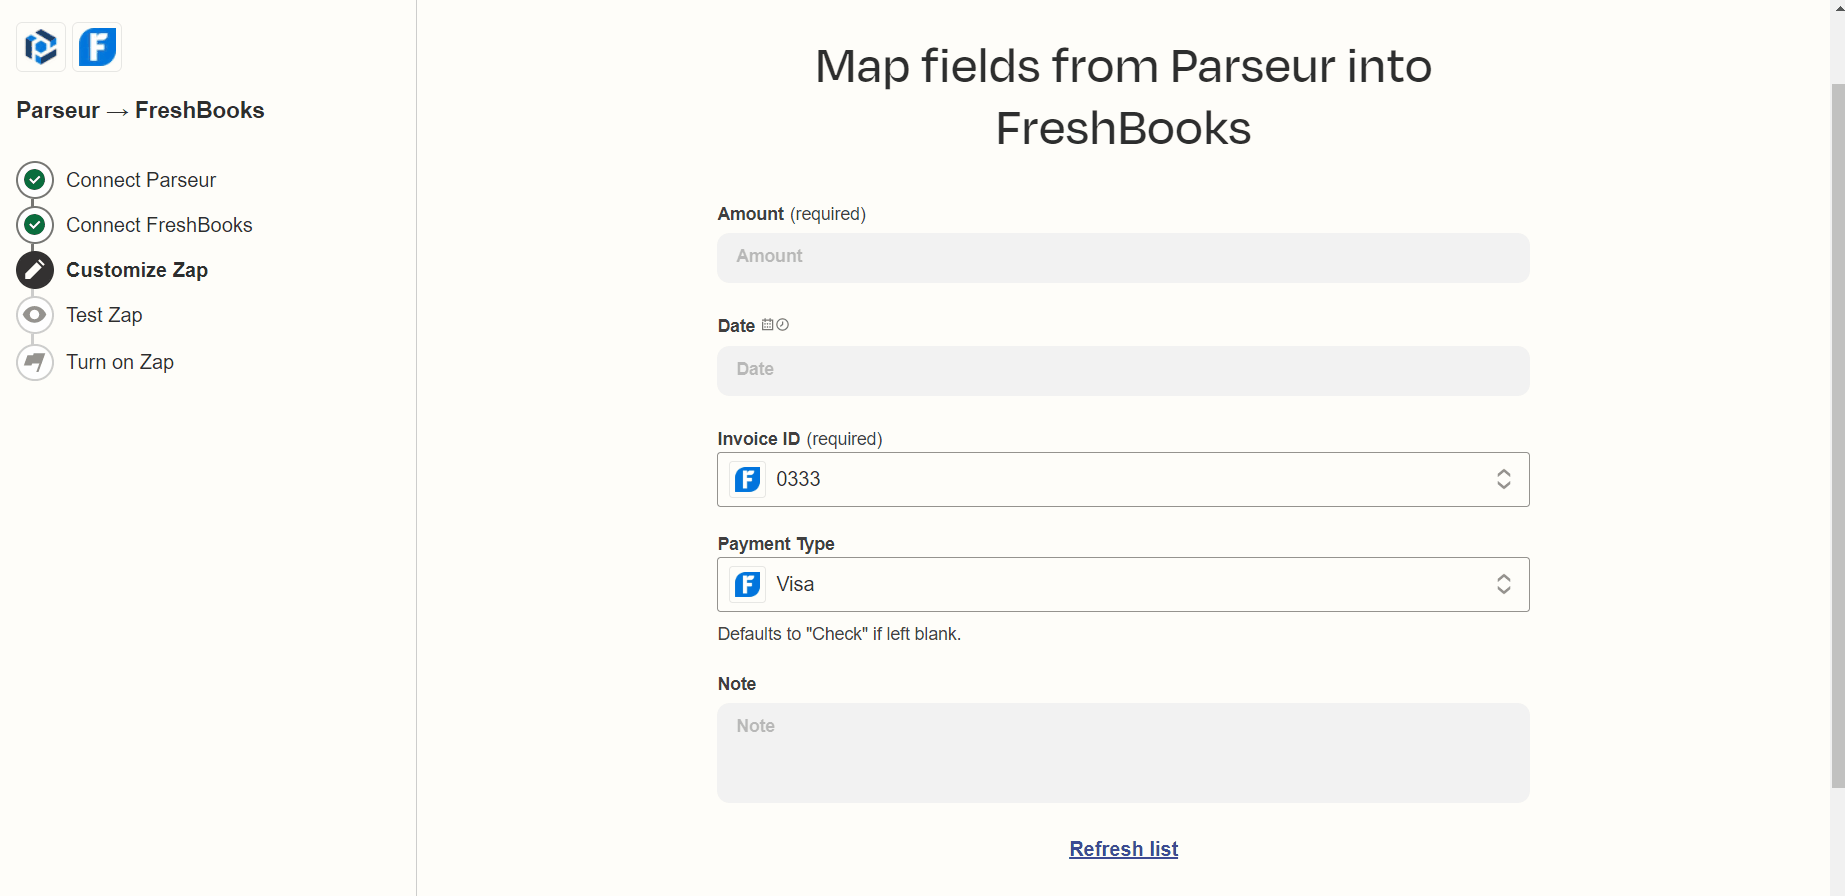 Map fields between Parseur and FreshBooks